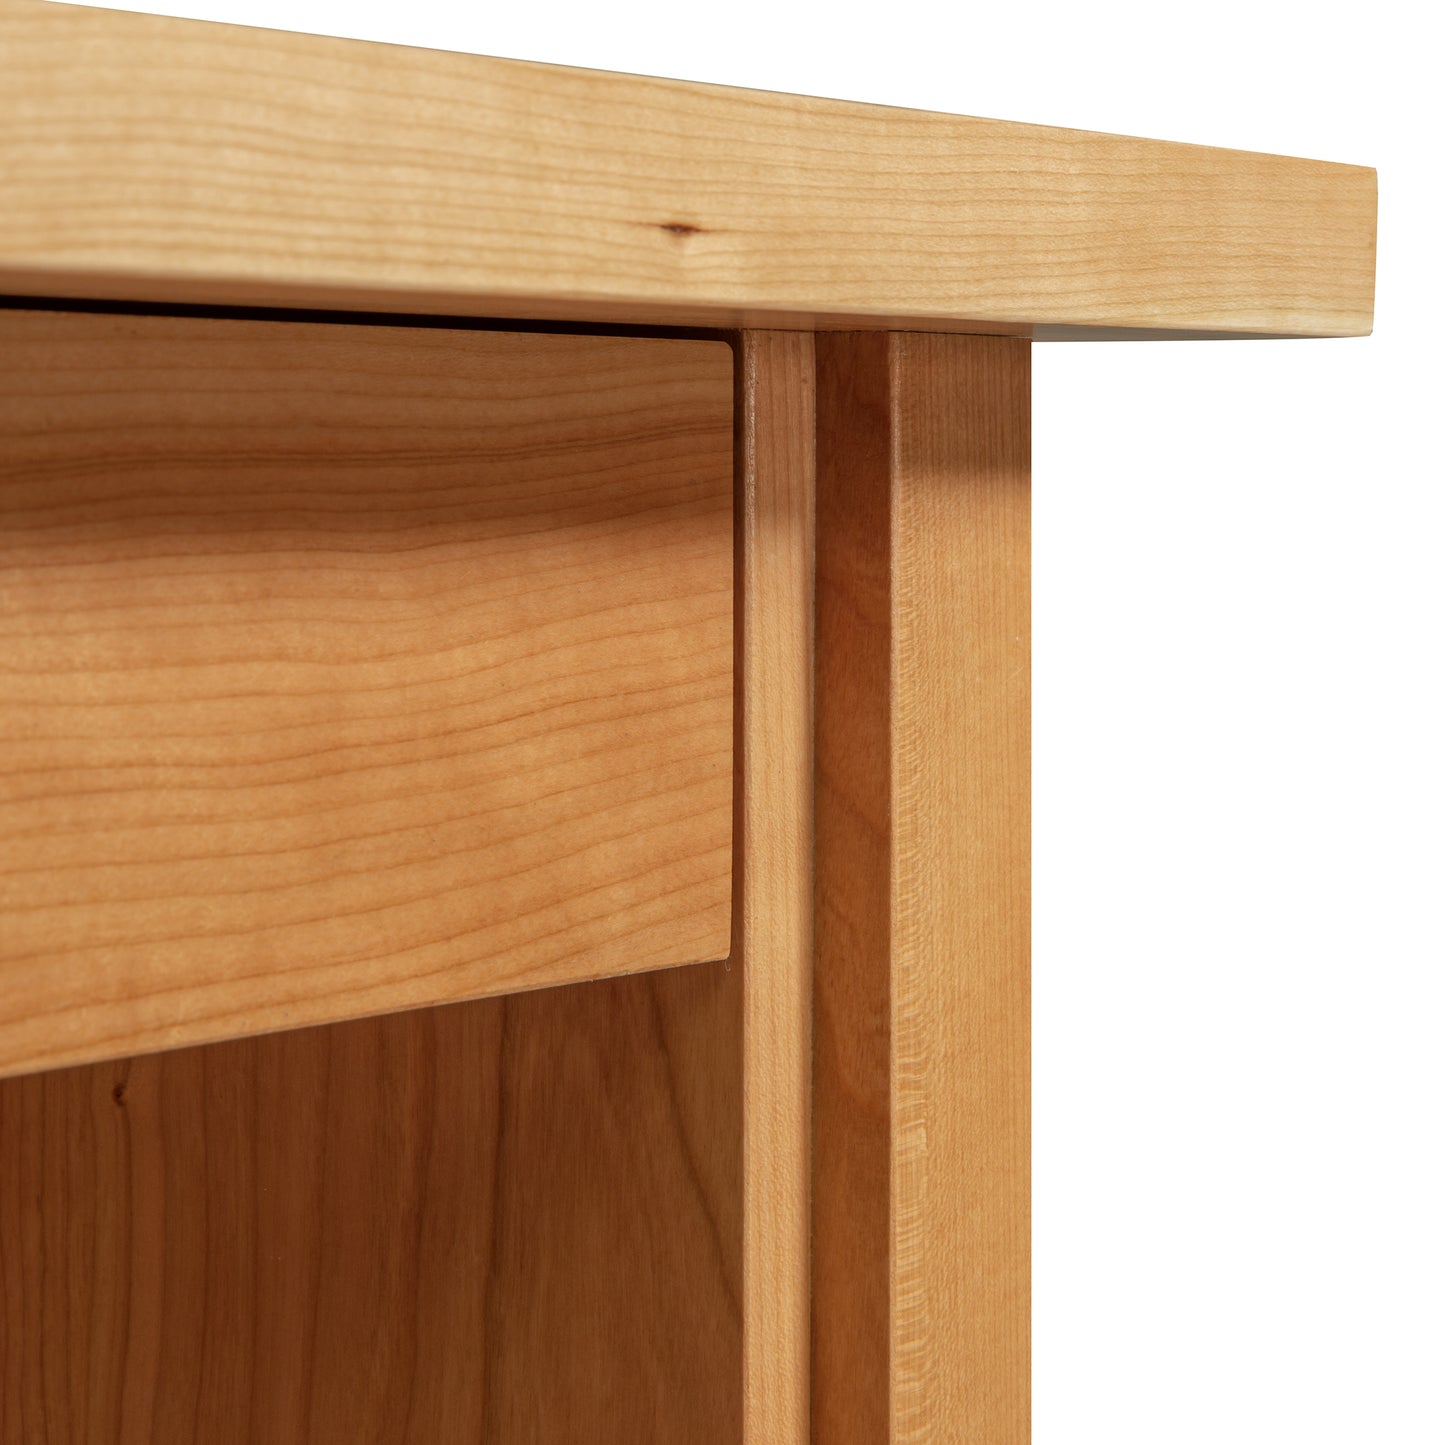 A close up of a Small Wood Executive Desk with a drawer for storage, made by Lyndon Furniture.